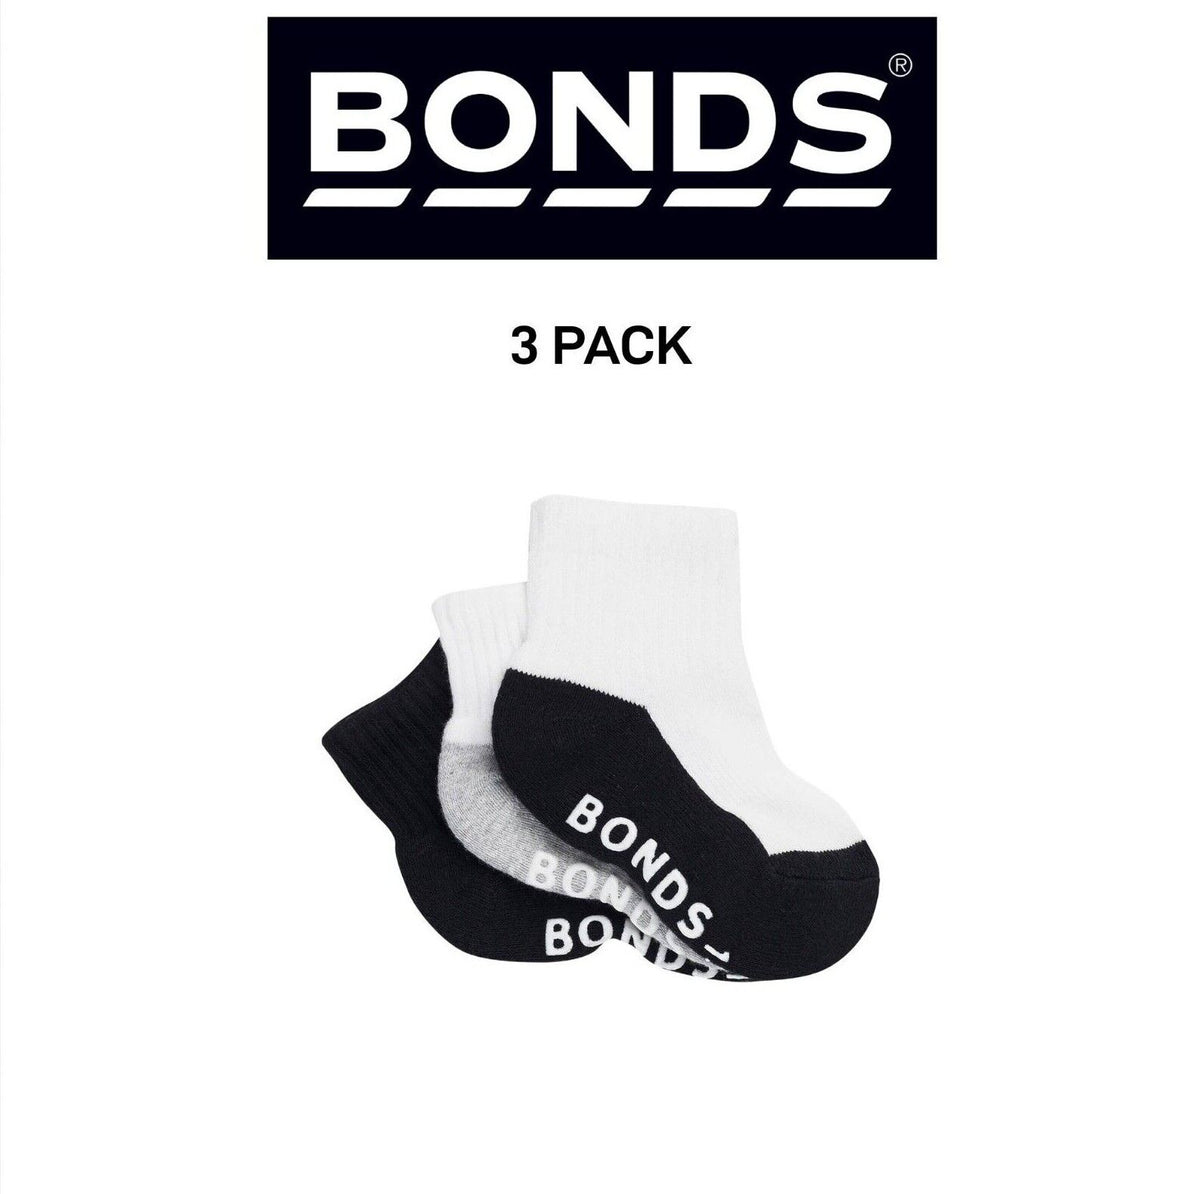 Bonds Baby Cushioned Quarter Crew Thickness for Comfiness Socks 3 Pack RXUH3N